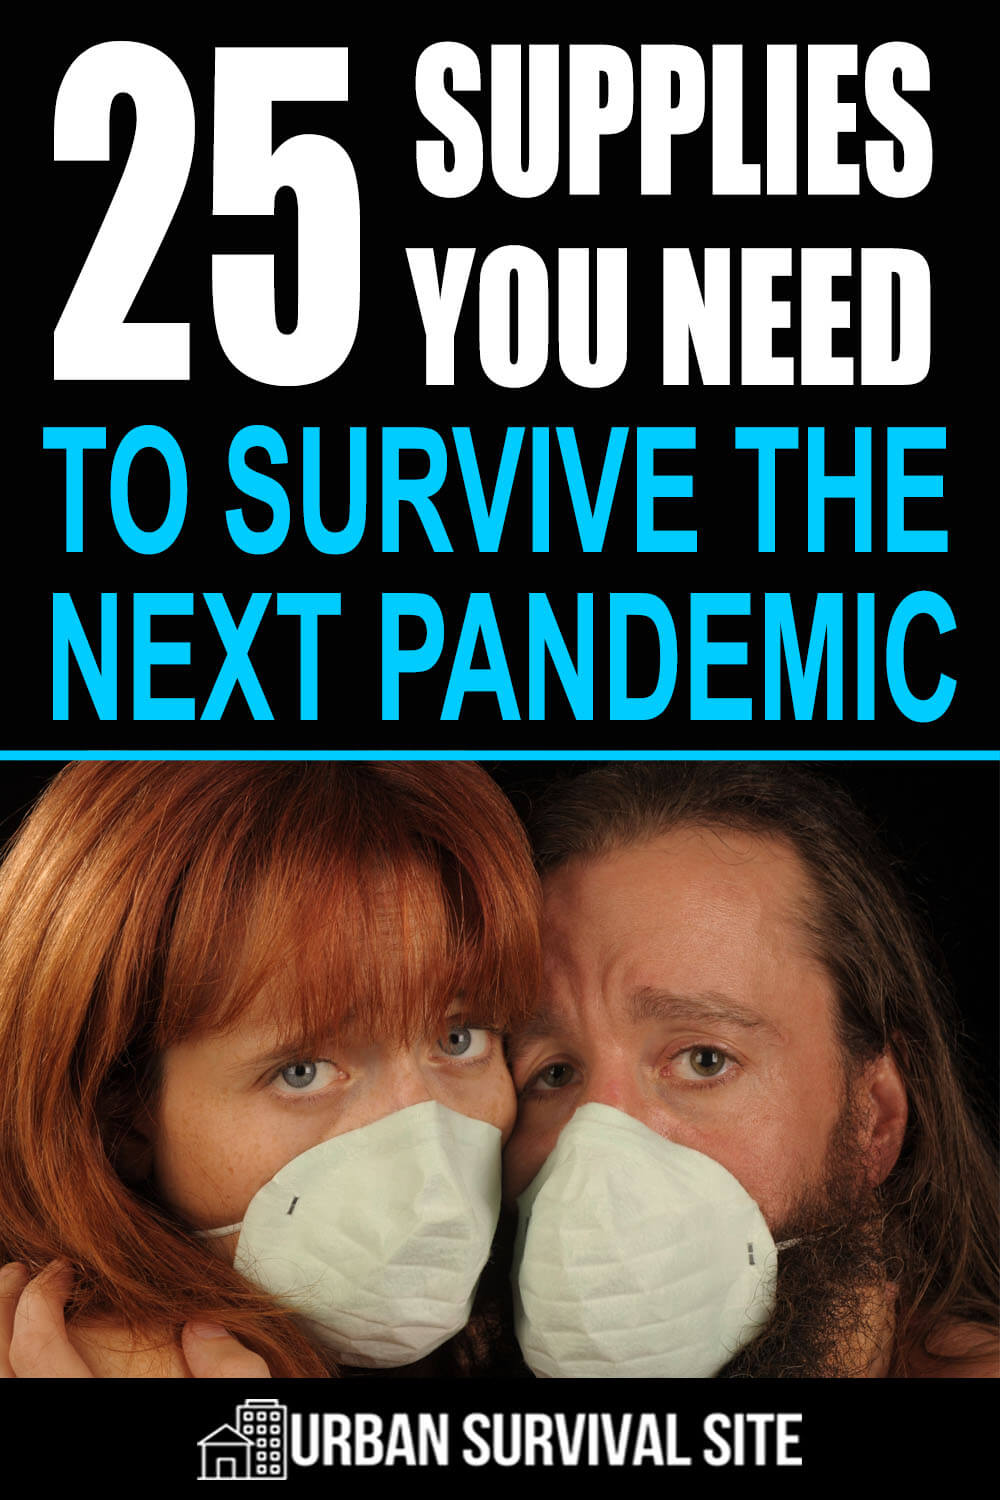 25 Supplies You Need to Survive the Next Pandemic